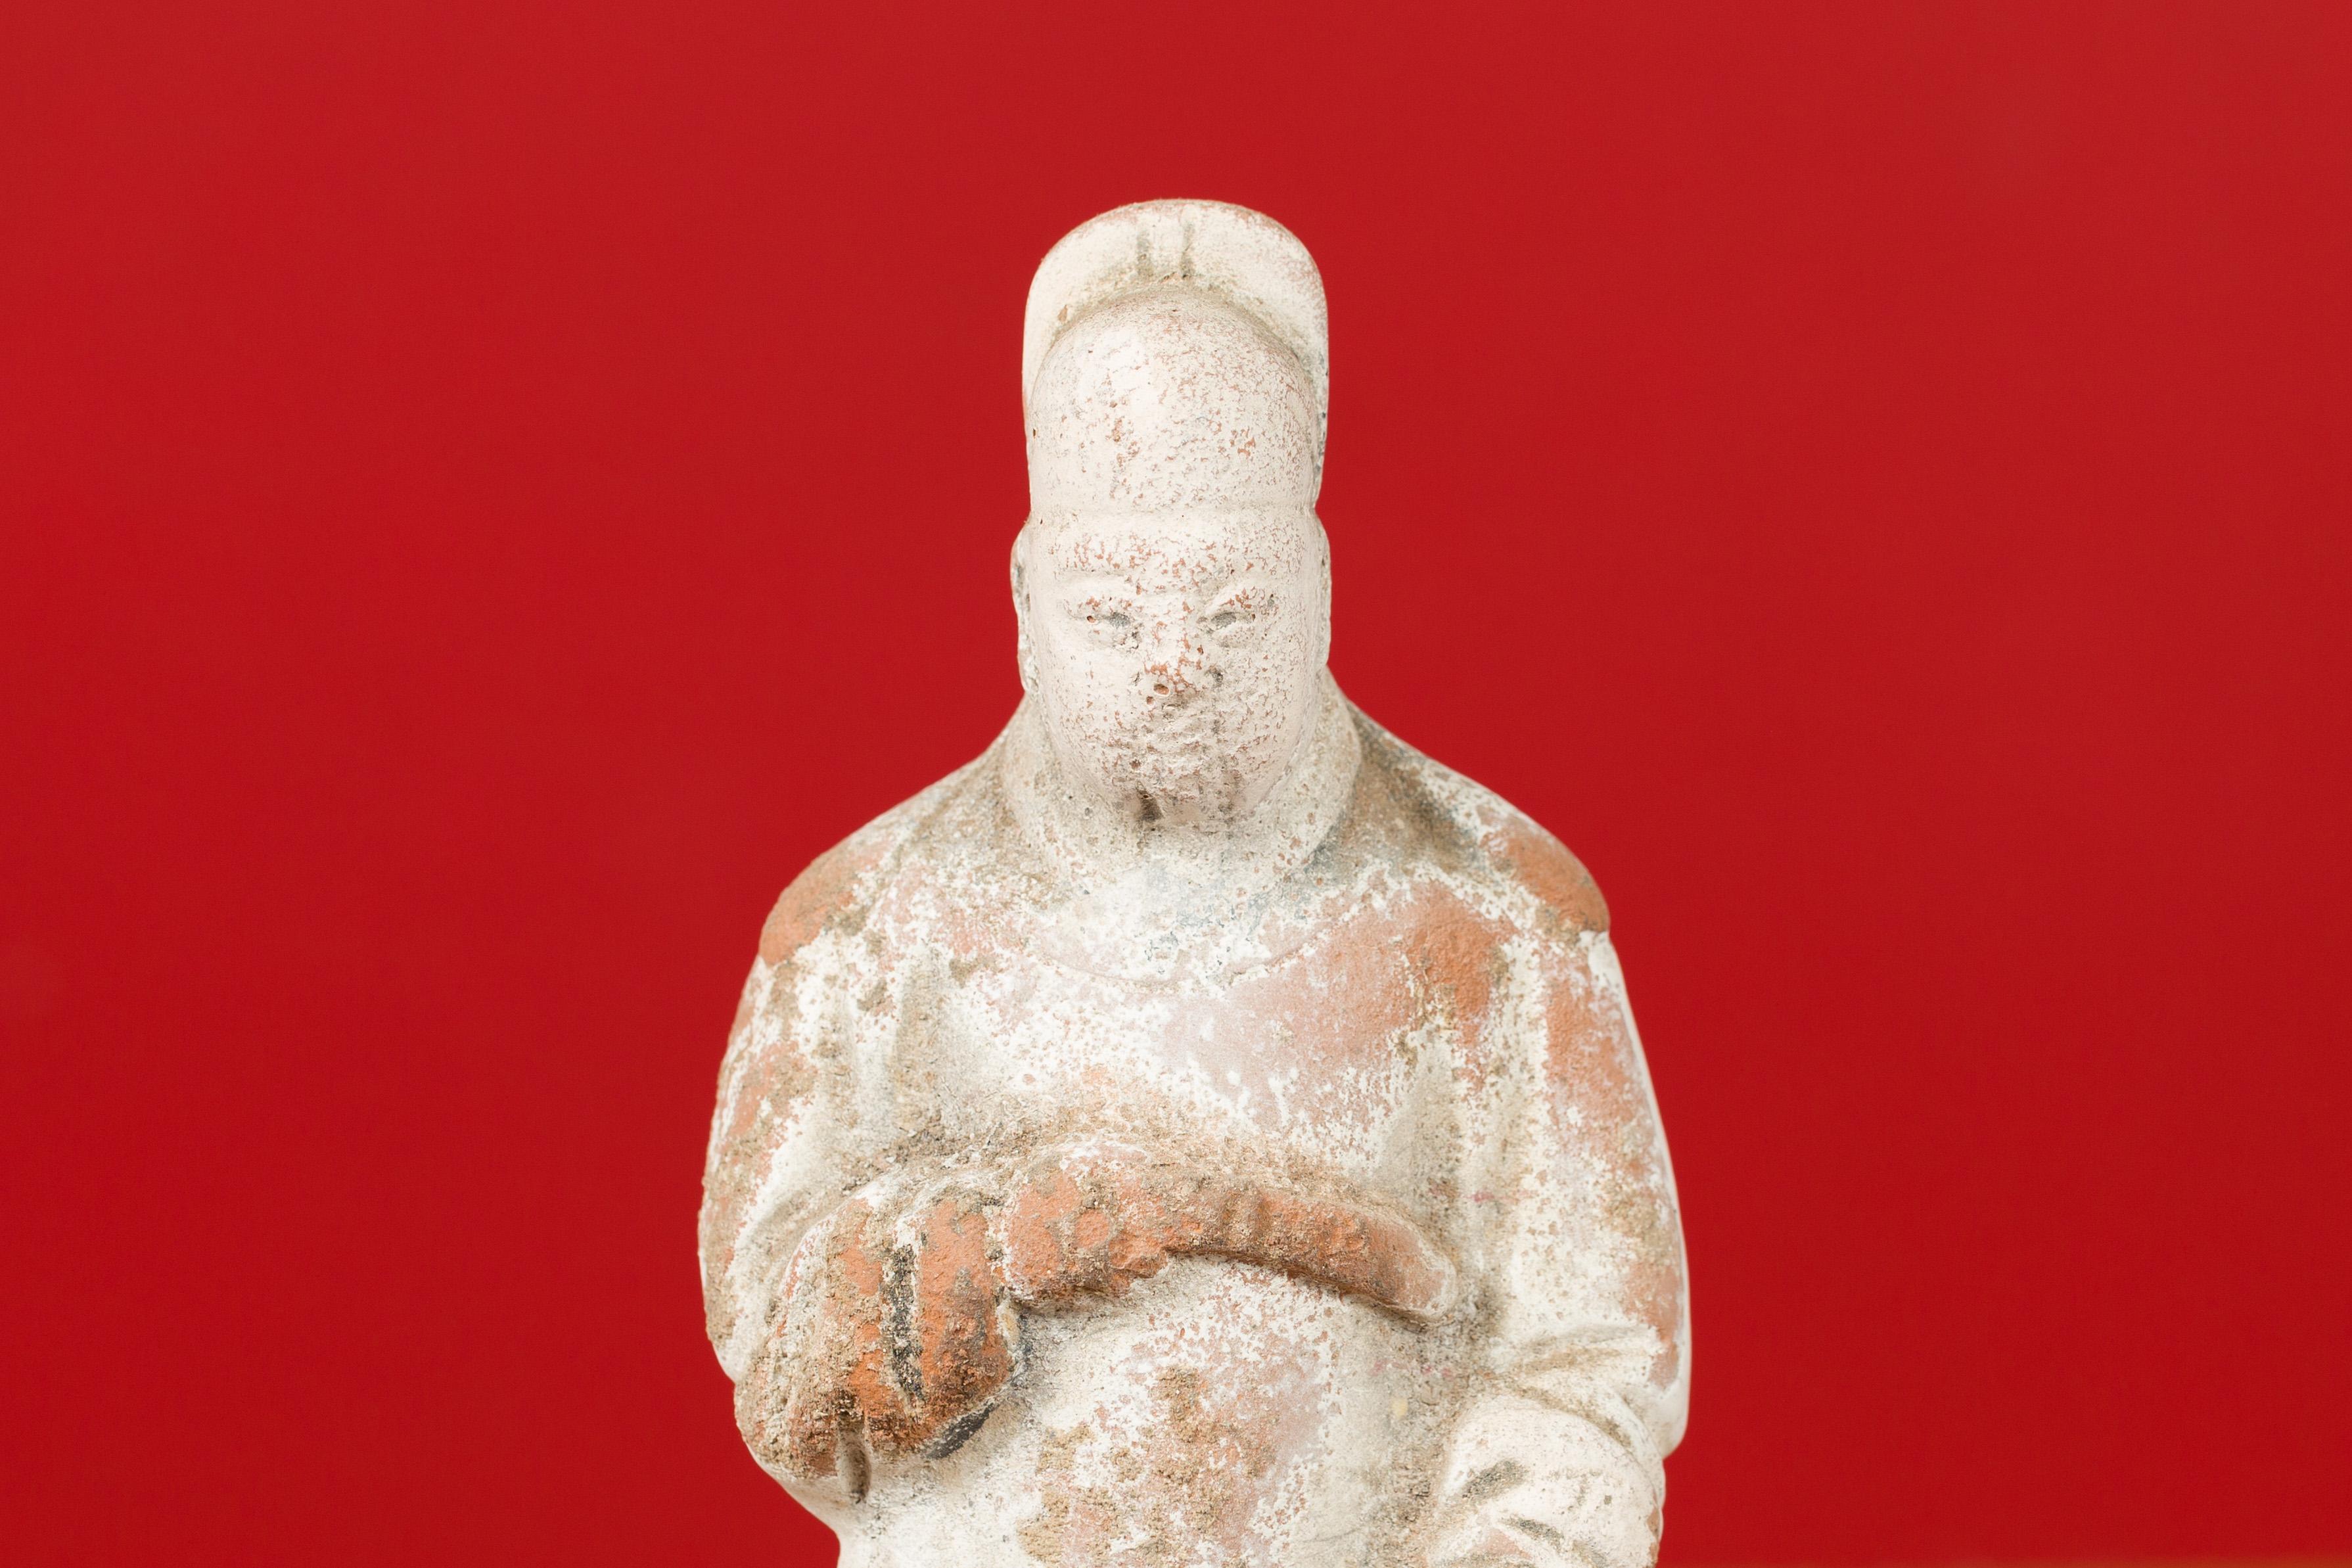 18th Century and Earlier Chinese Han Dynasty Period Terracotta Dignitary Figure with White and Red Paint